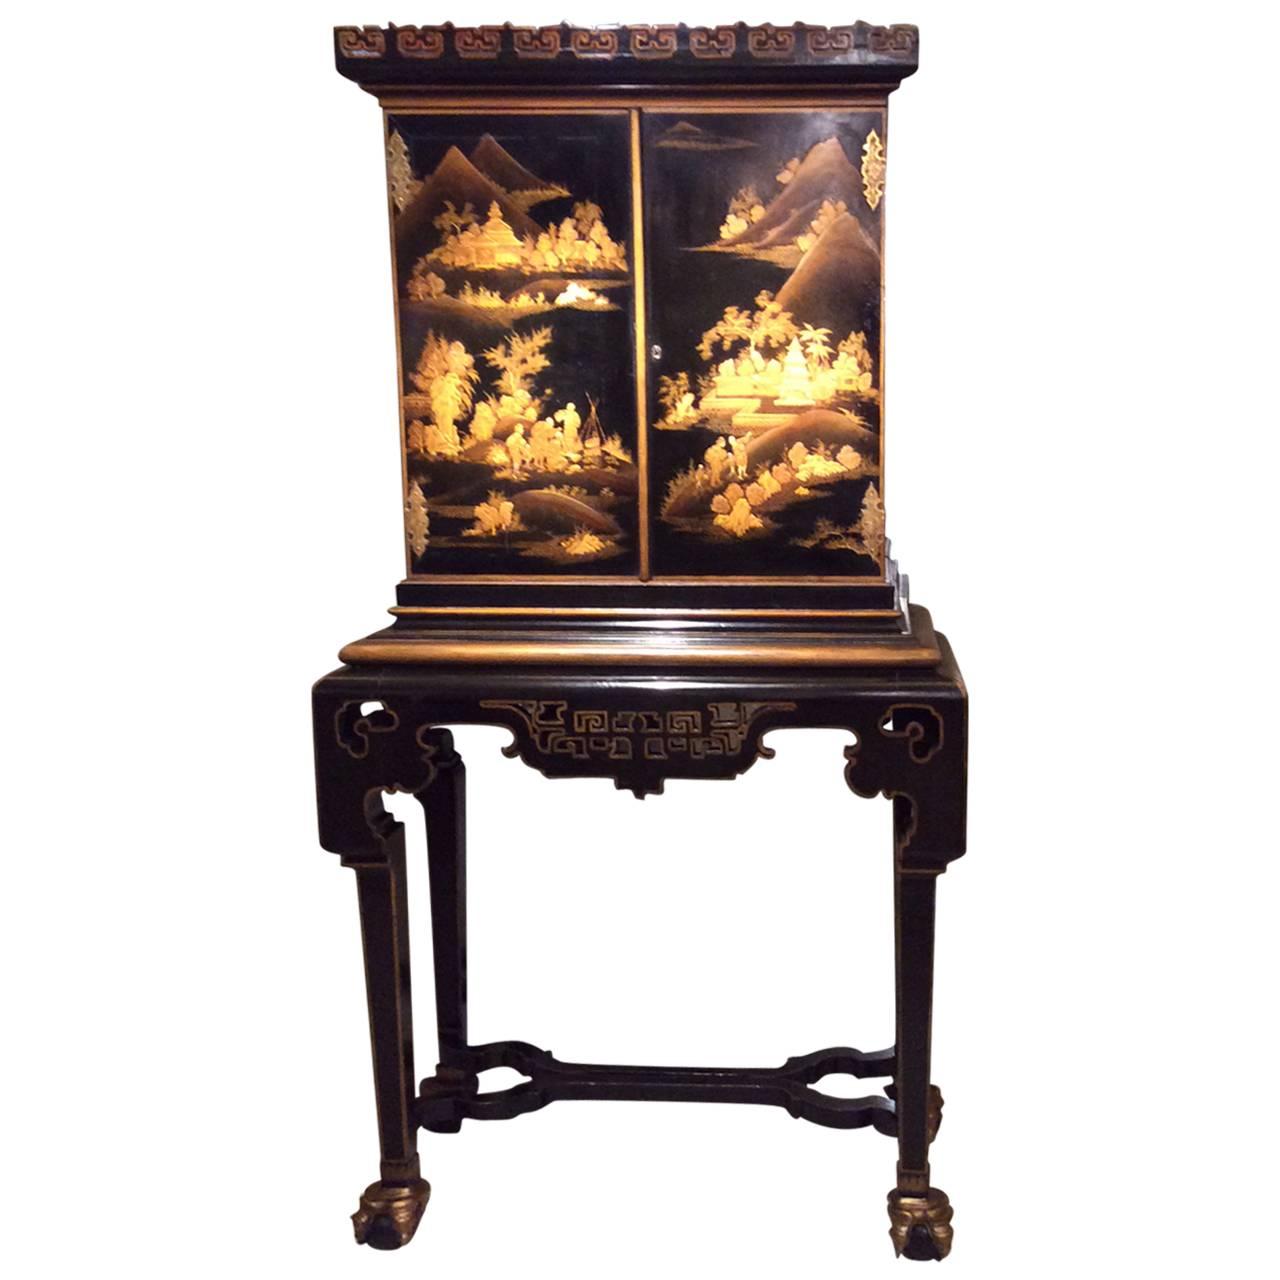 Anglo-Japanese 19th Century Cabinet in European Lacquer, England, circa 1880